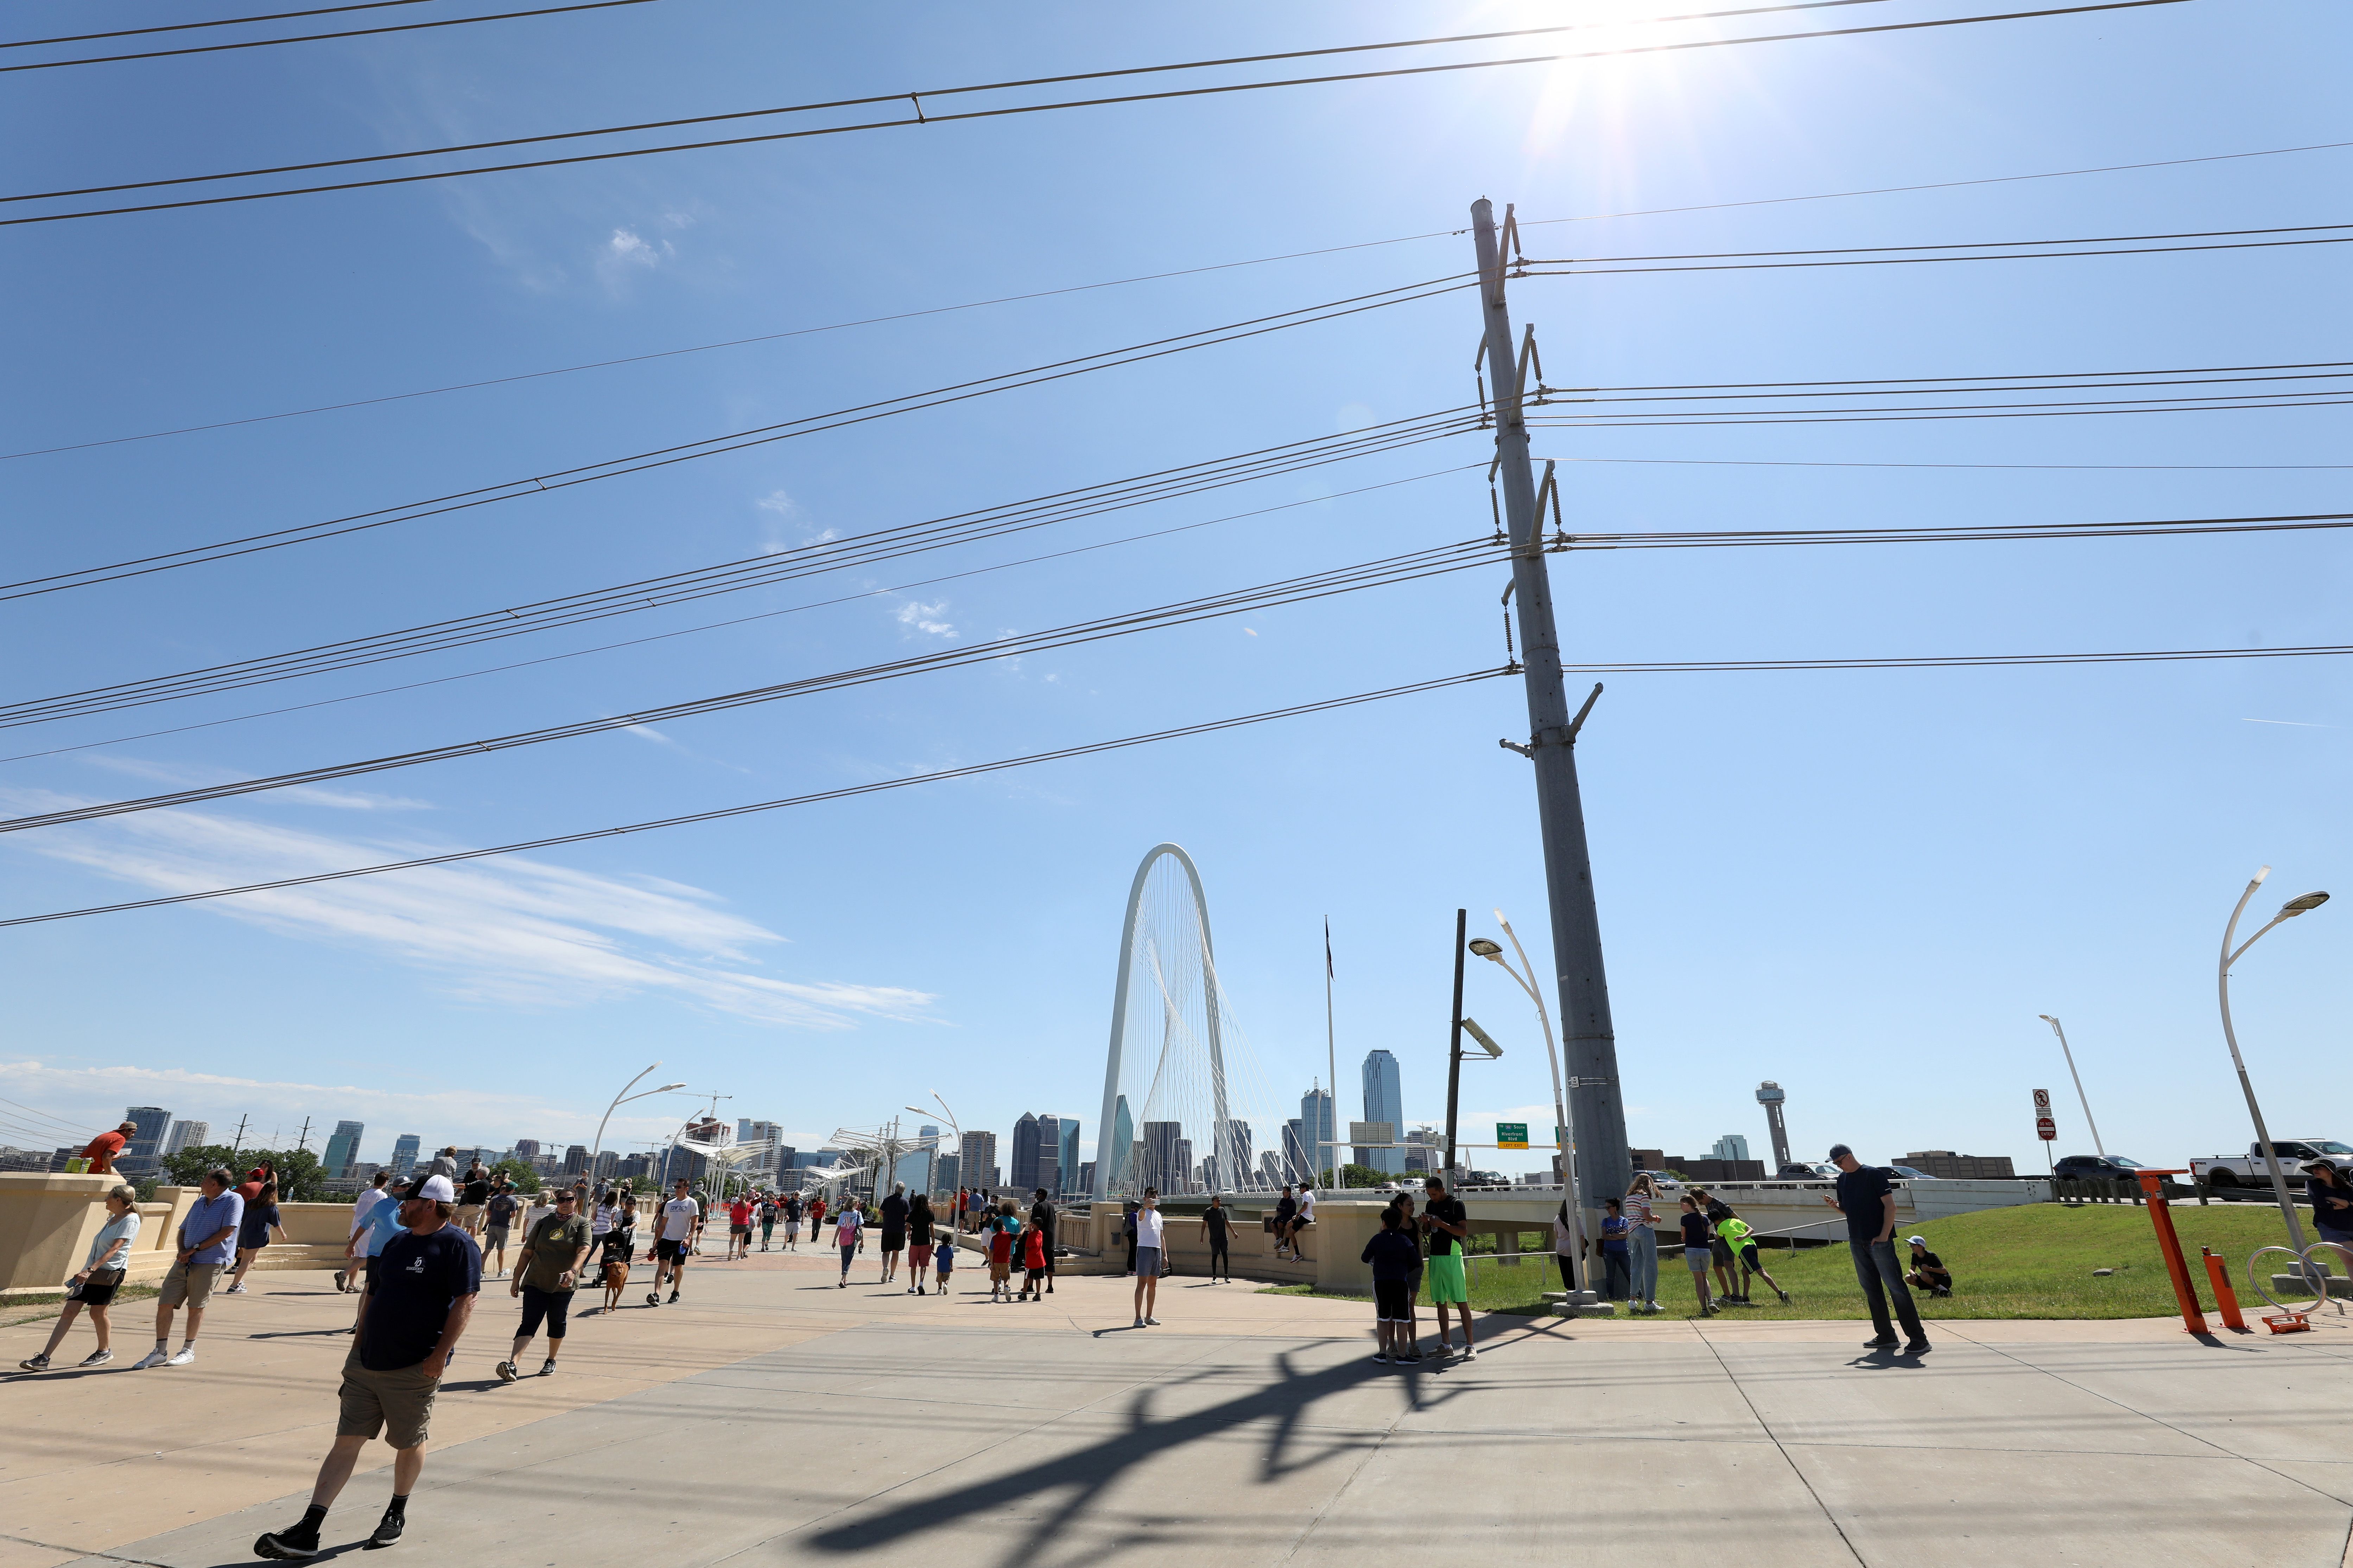 People gather on a pedestrian bridge in front of the Dallas skyline